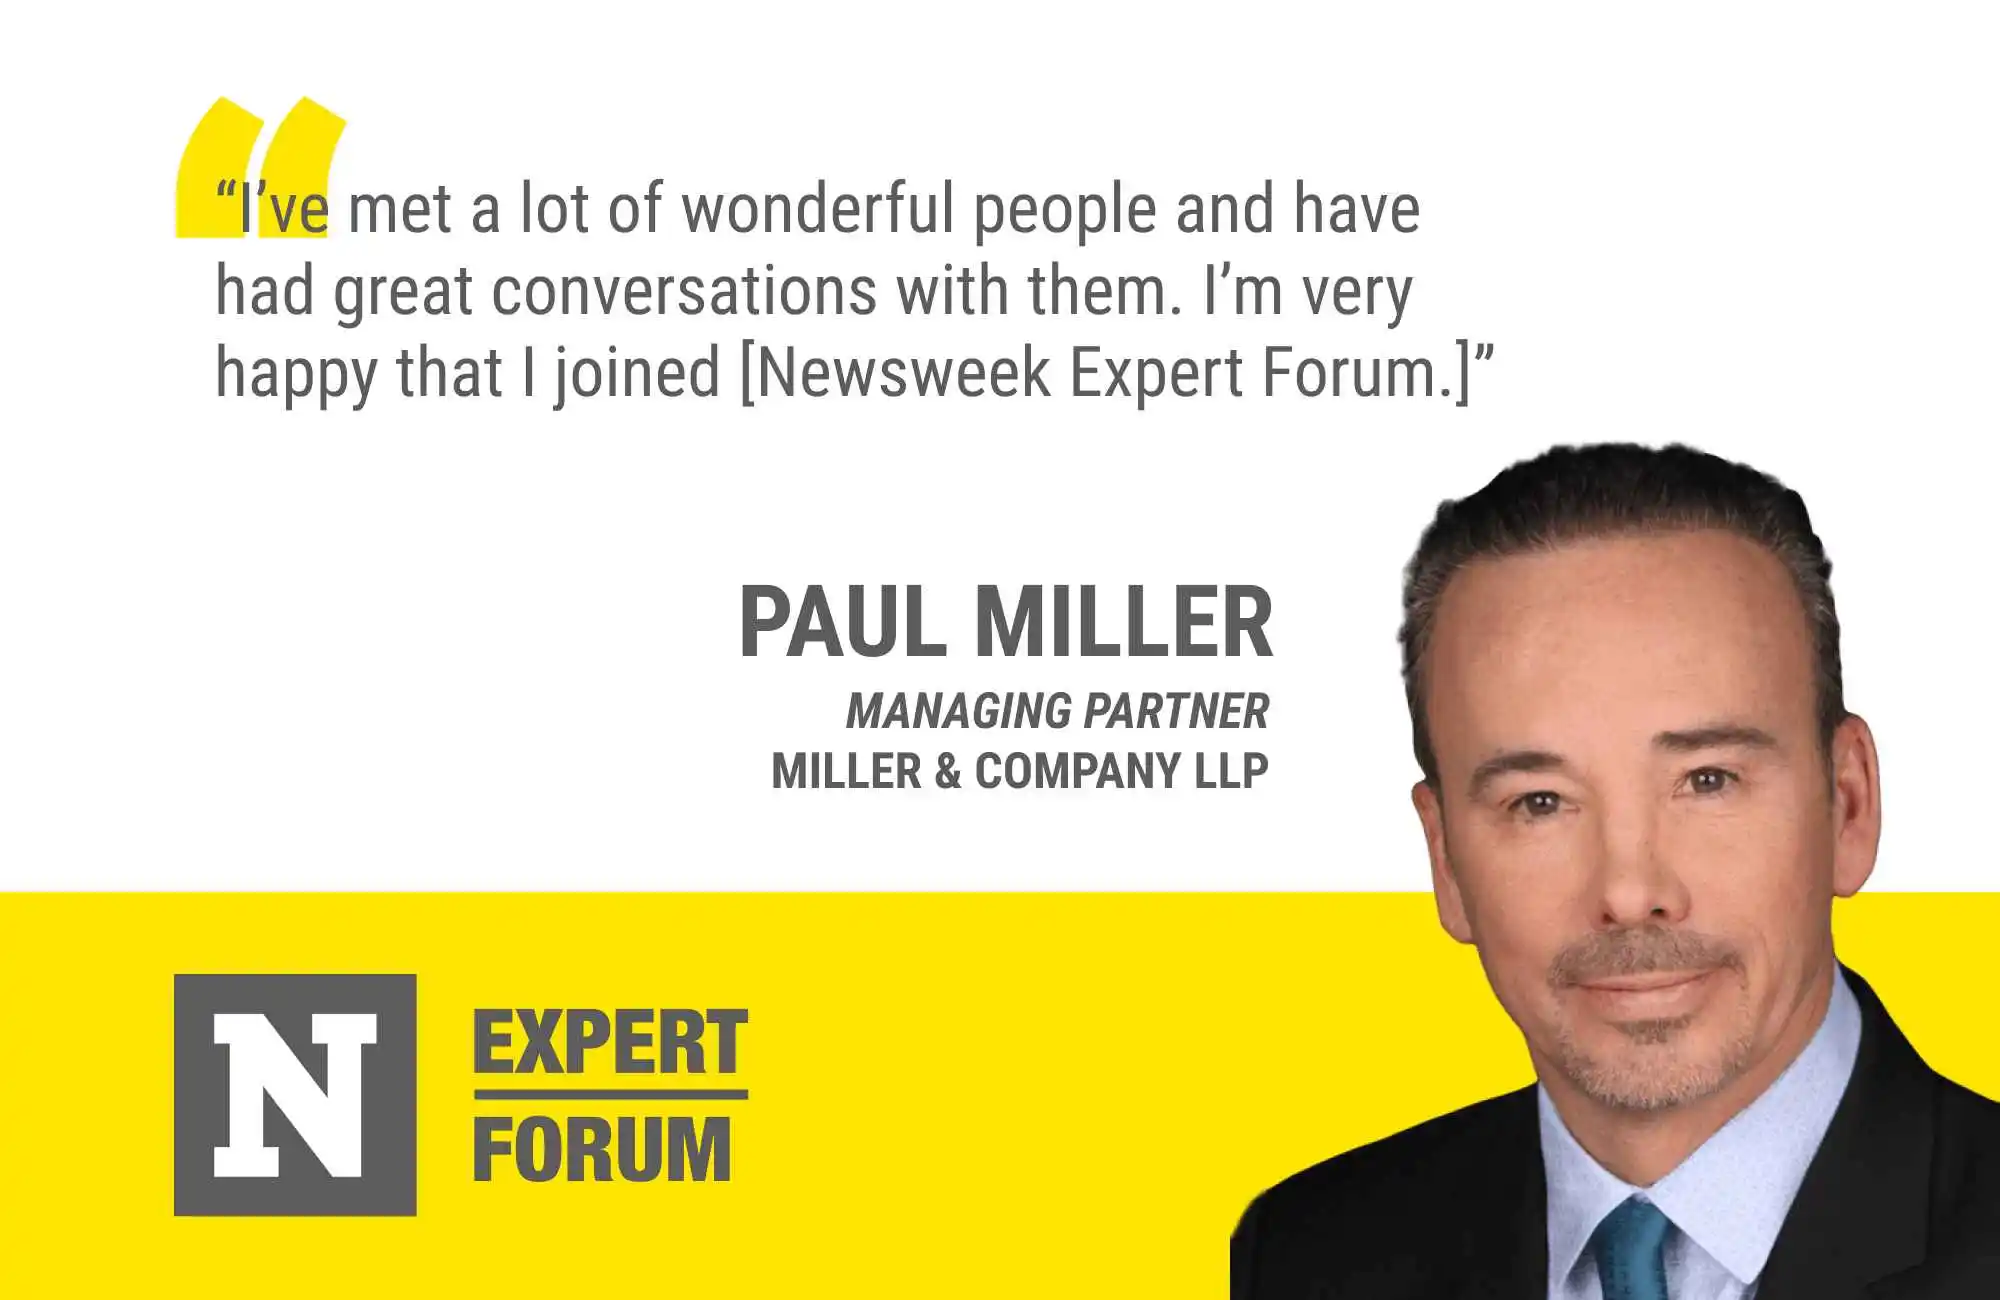 For Paul Miller, Newsweek Expert Forum is a Gateway to New Connections